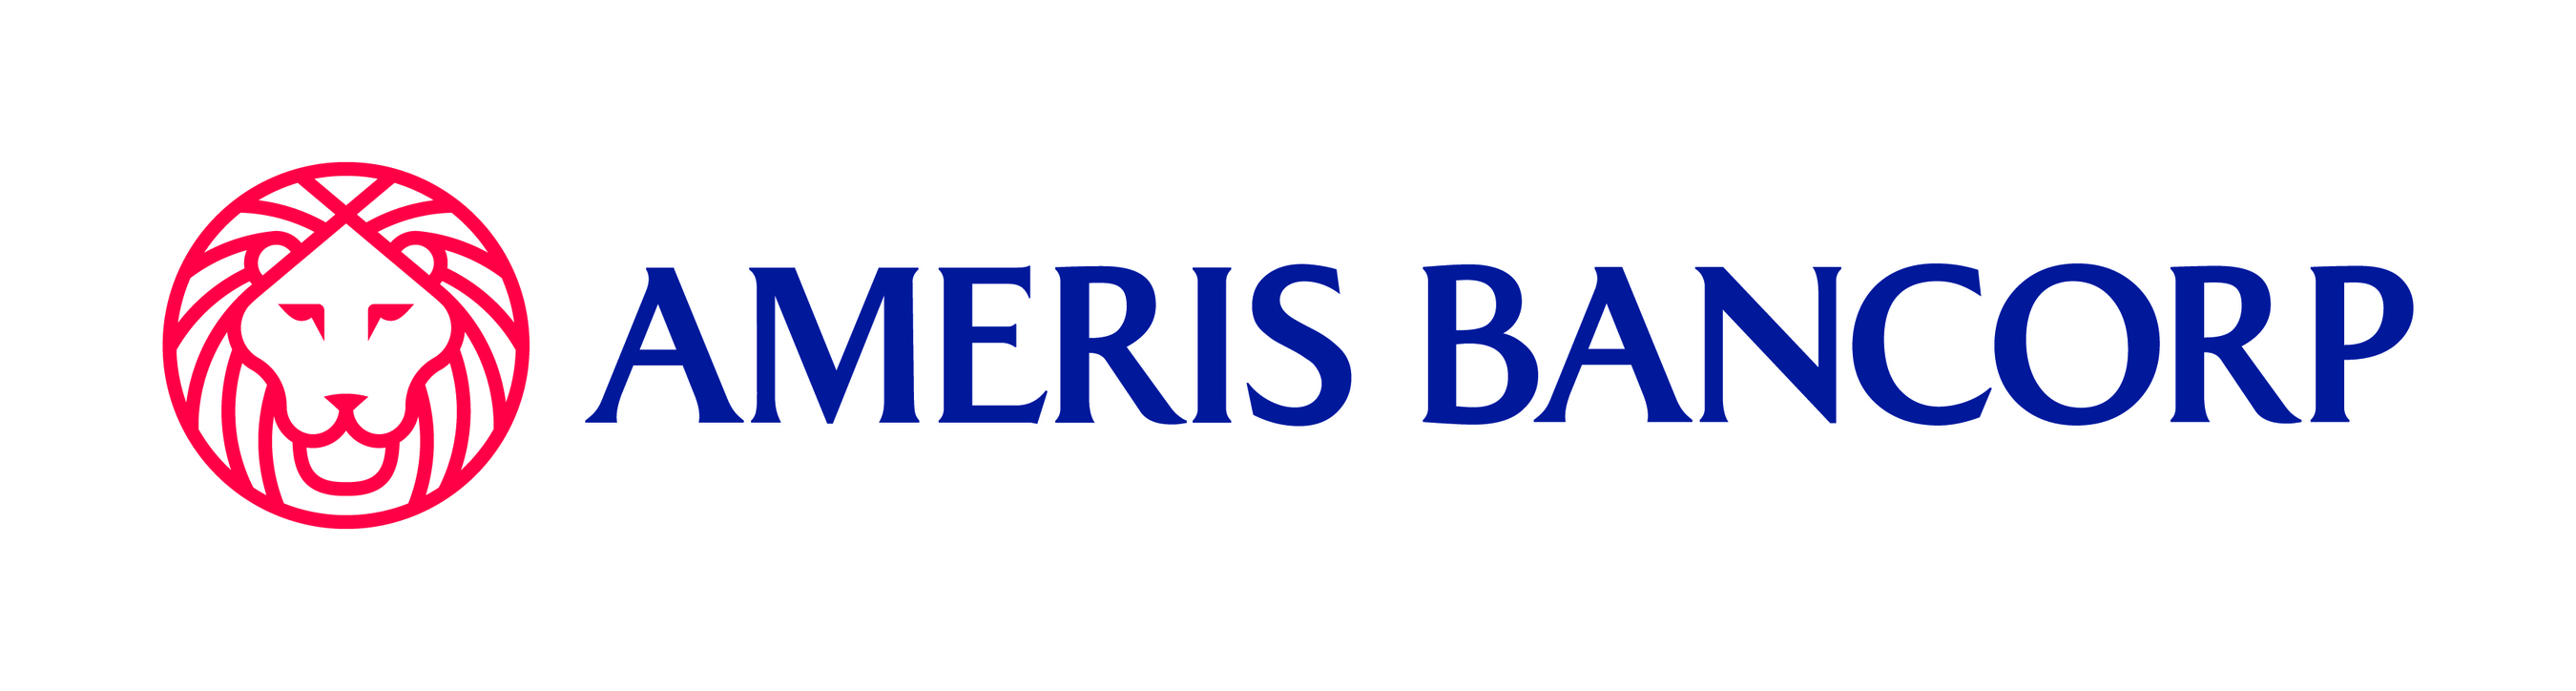 Ameris Bancorp Announces Date Of Fourth Quarter 2018 Earnings Release And Conference Call